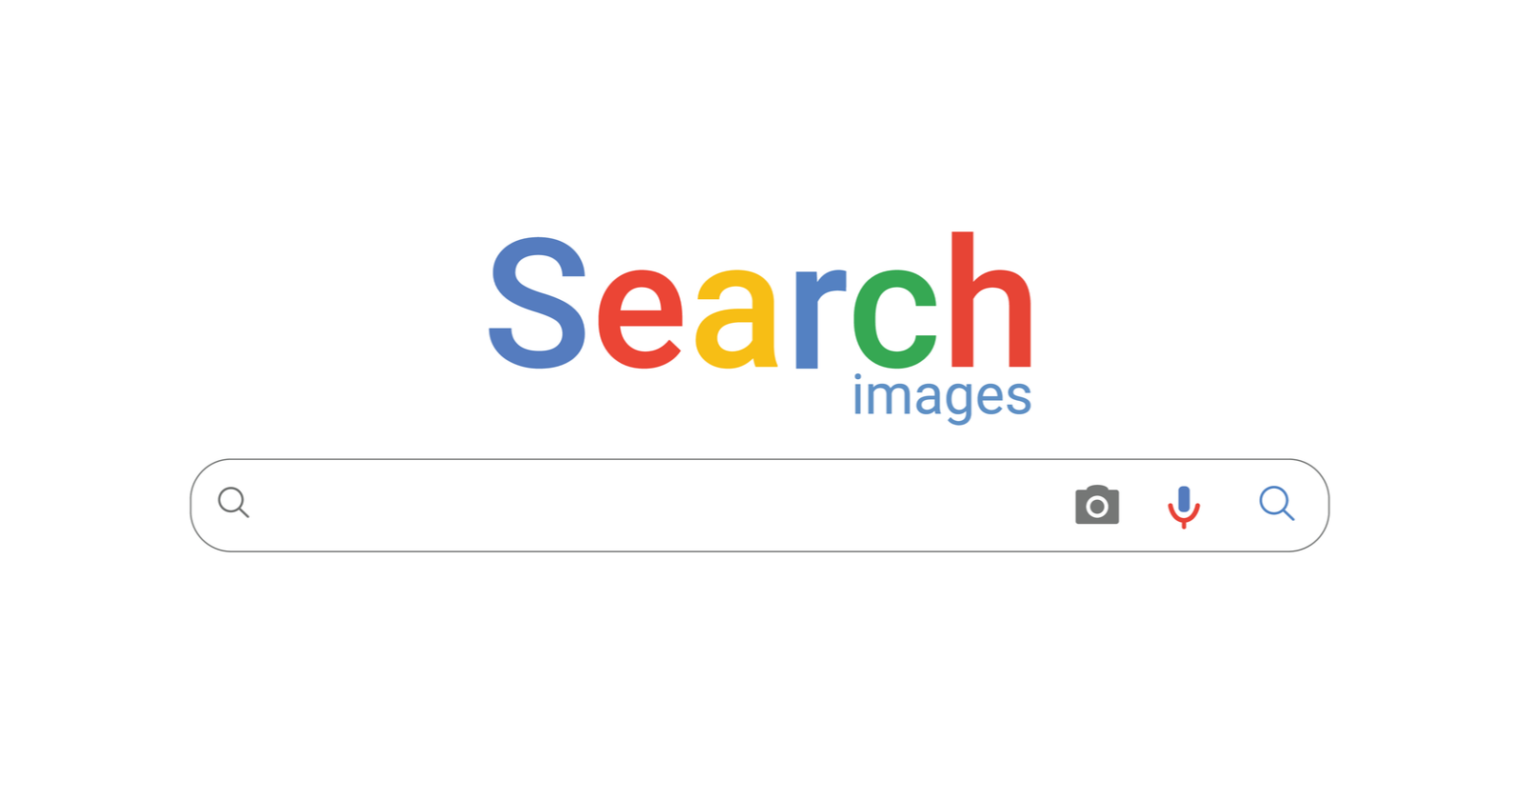 How To Do Reverse Image Search A Complete Guide Just click the upload button or enter image url to search by image accurately. how to do reverse image search a